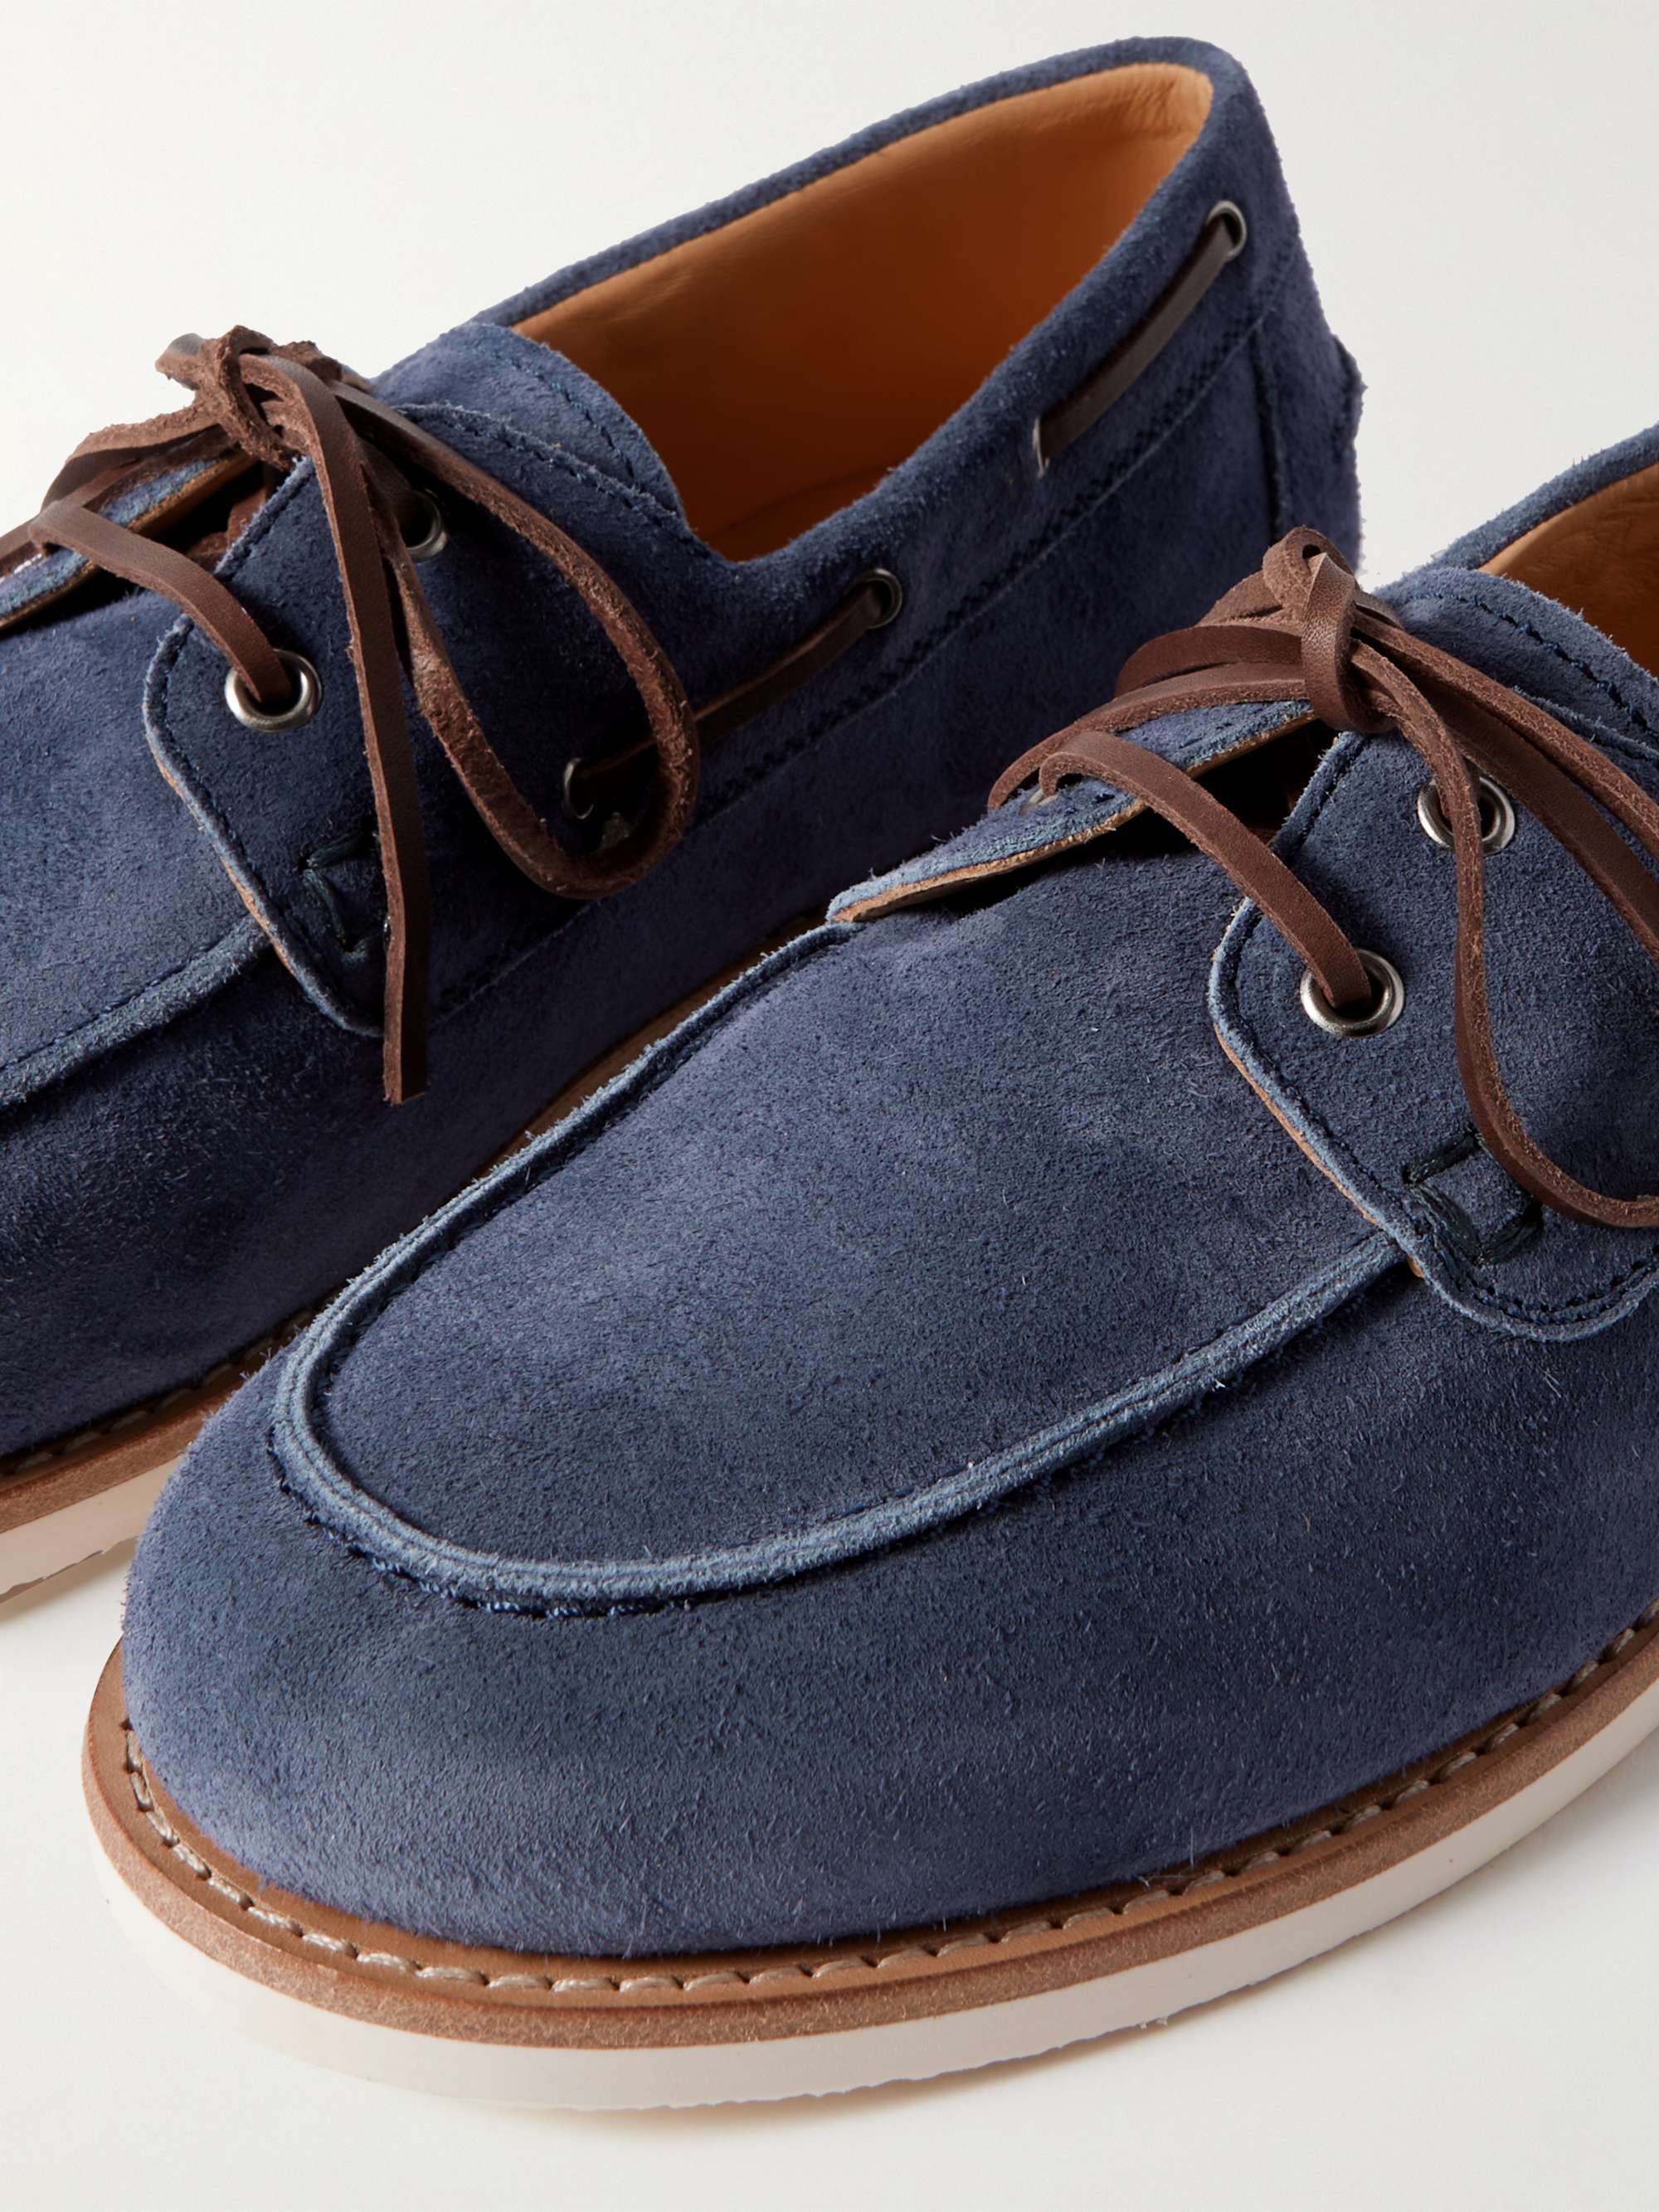 BRUNELLO CUCINELLI Leather-Trimmed Suede Boat Shoes